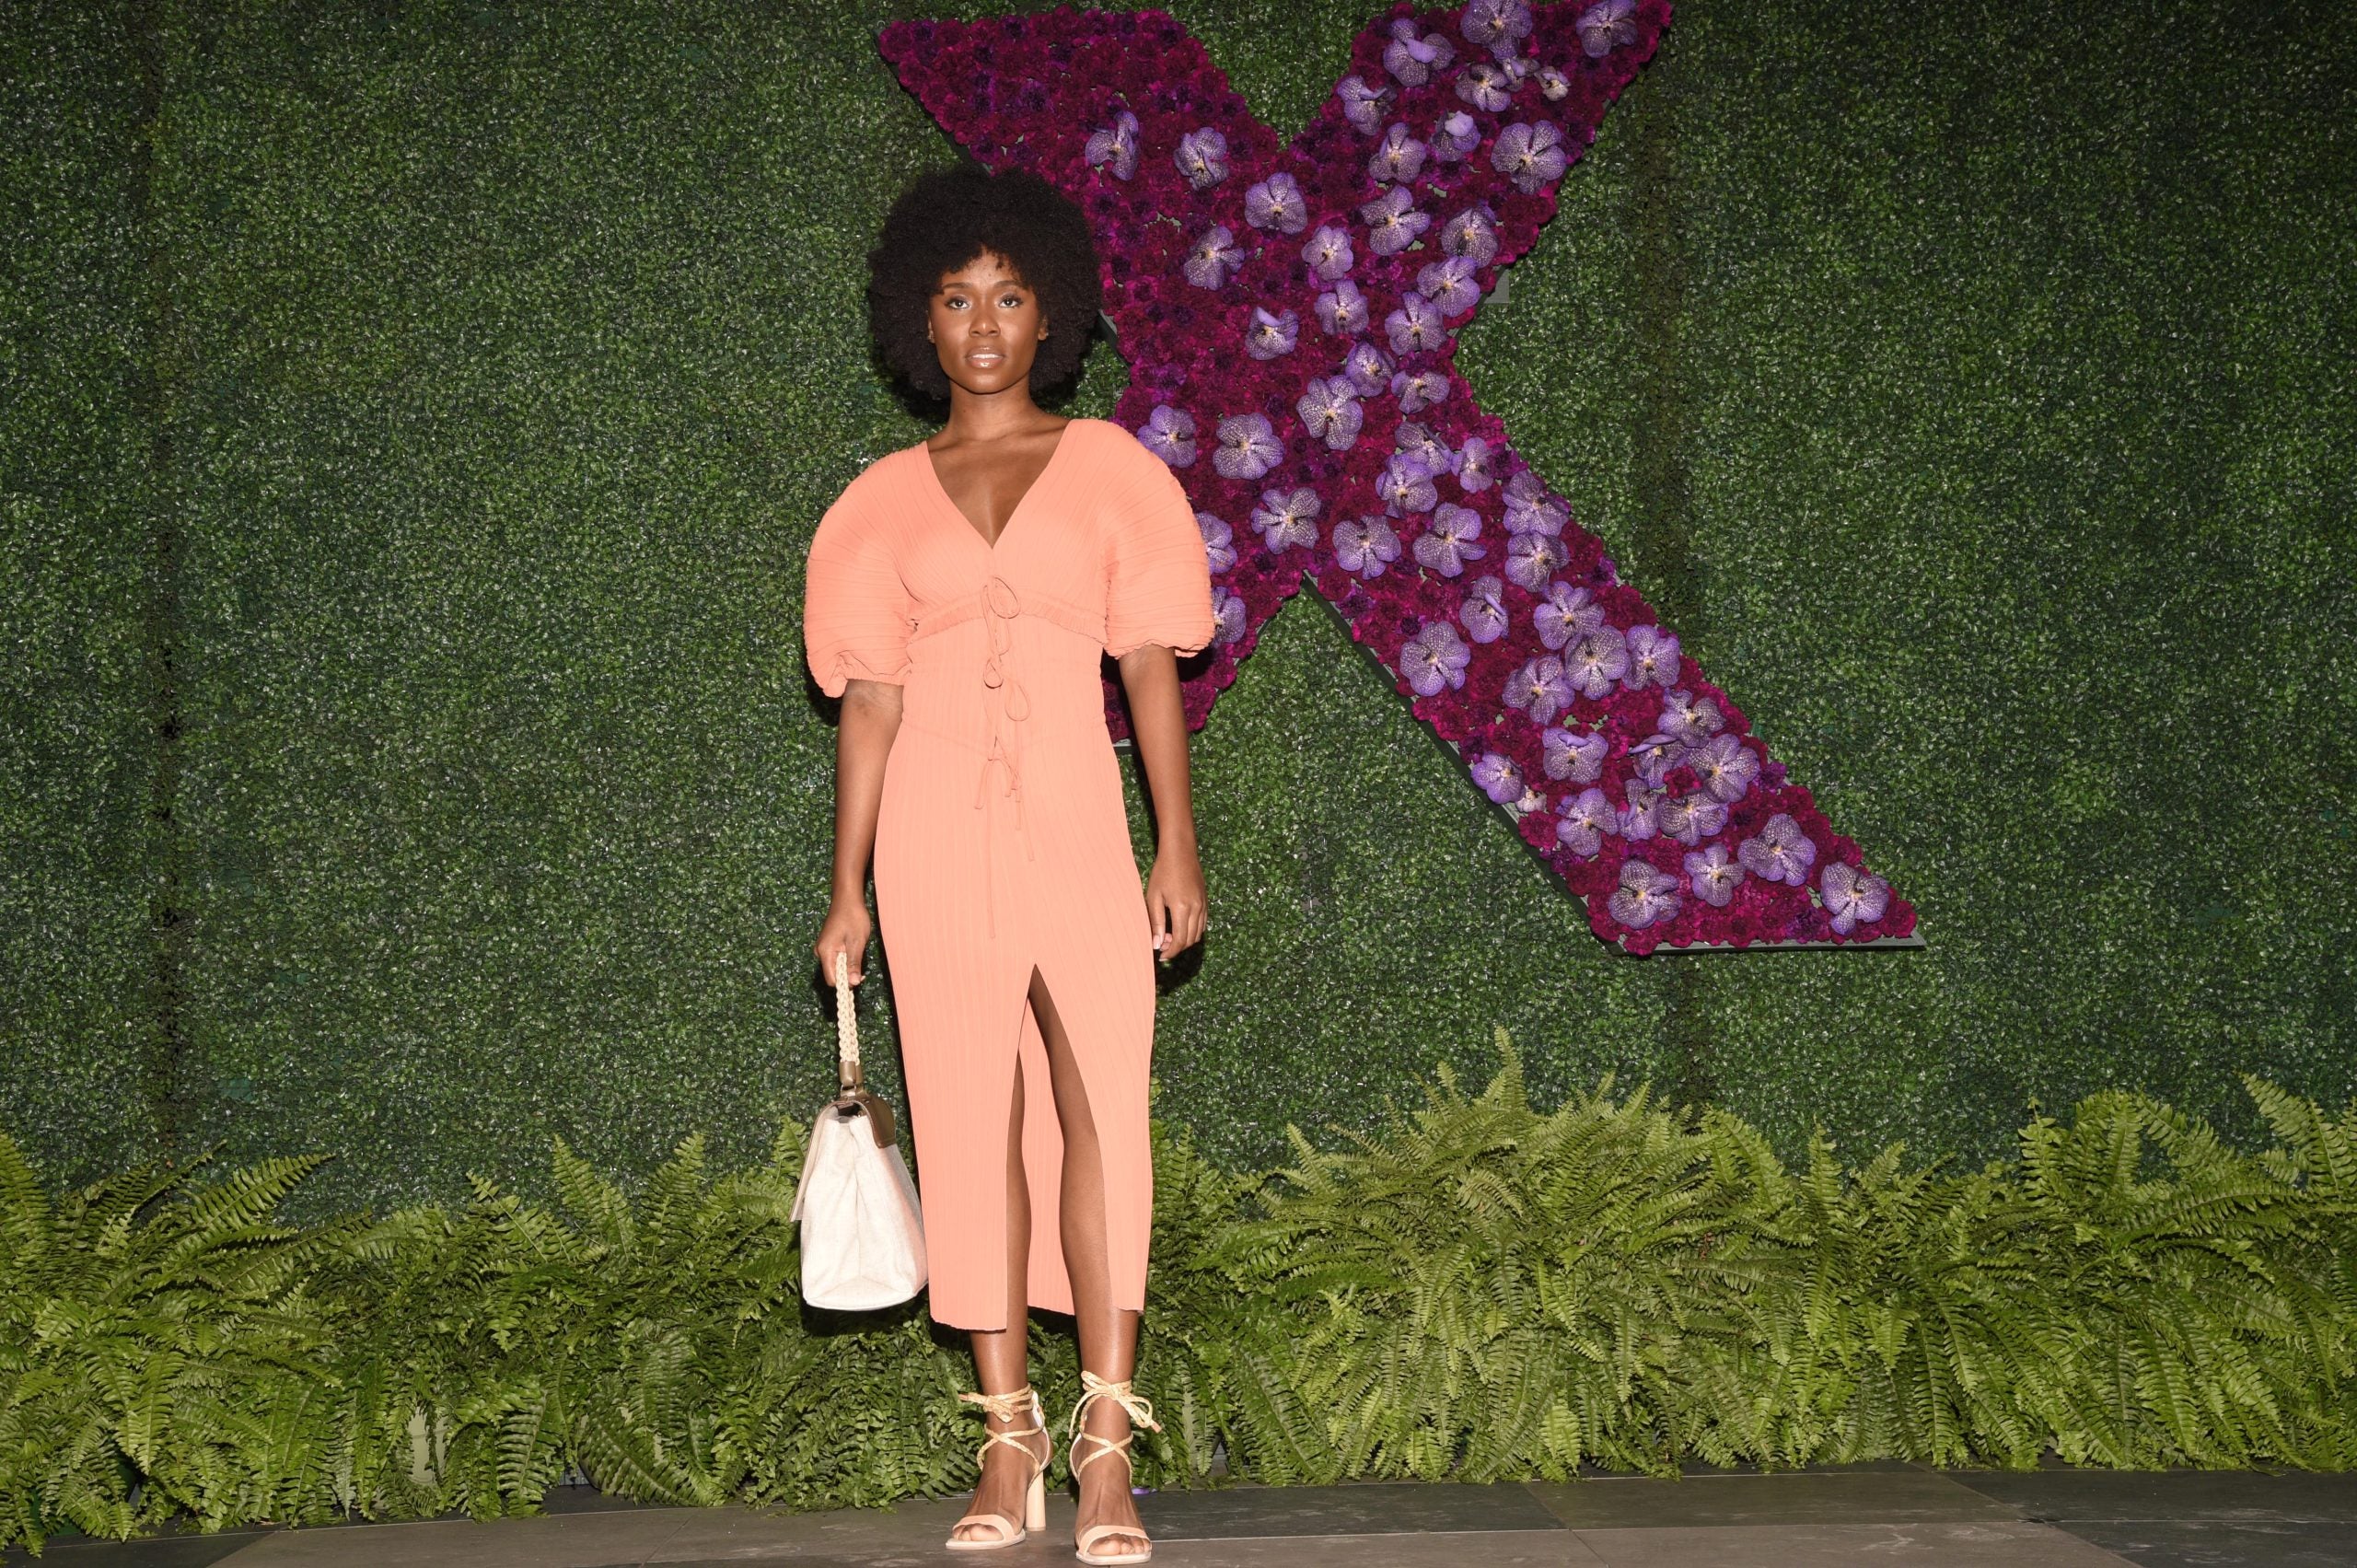 Law Roach partners with T.J. Maxx to spotlight 'accessible' designer looks